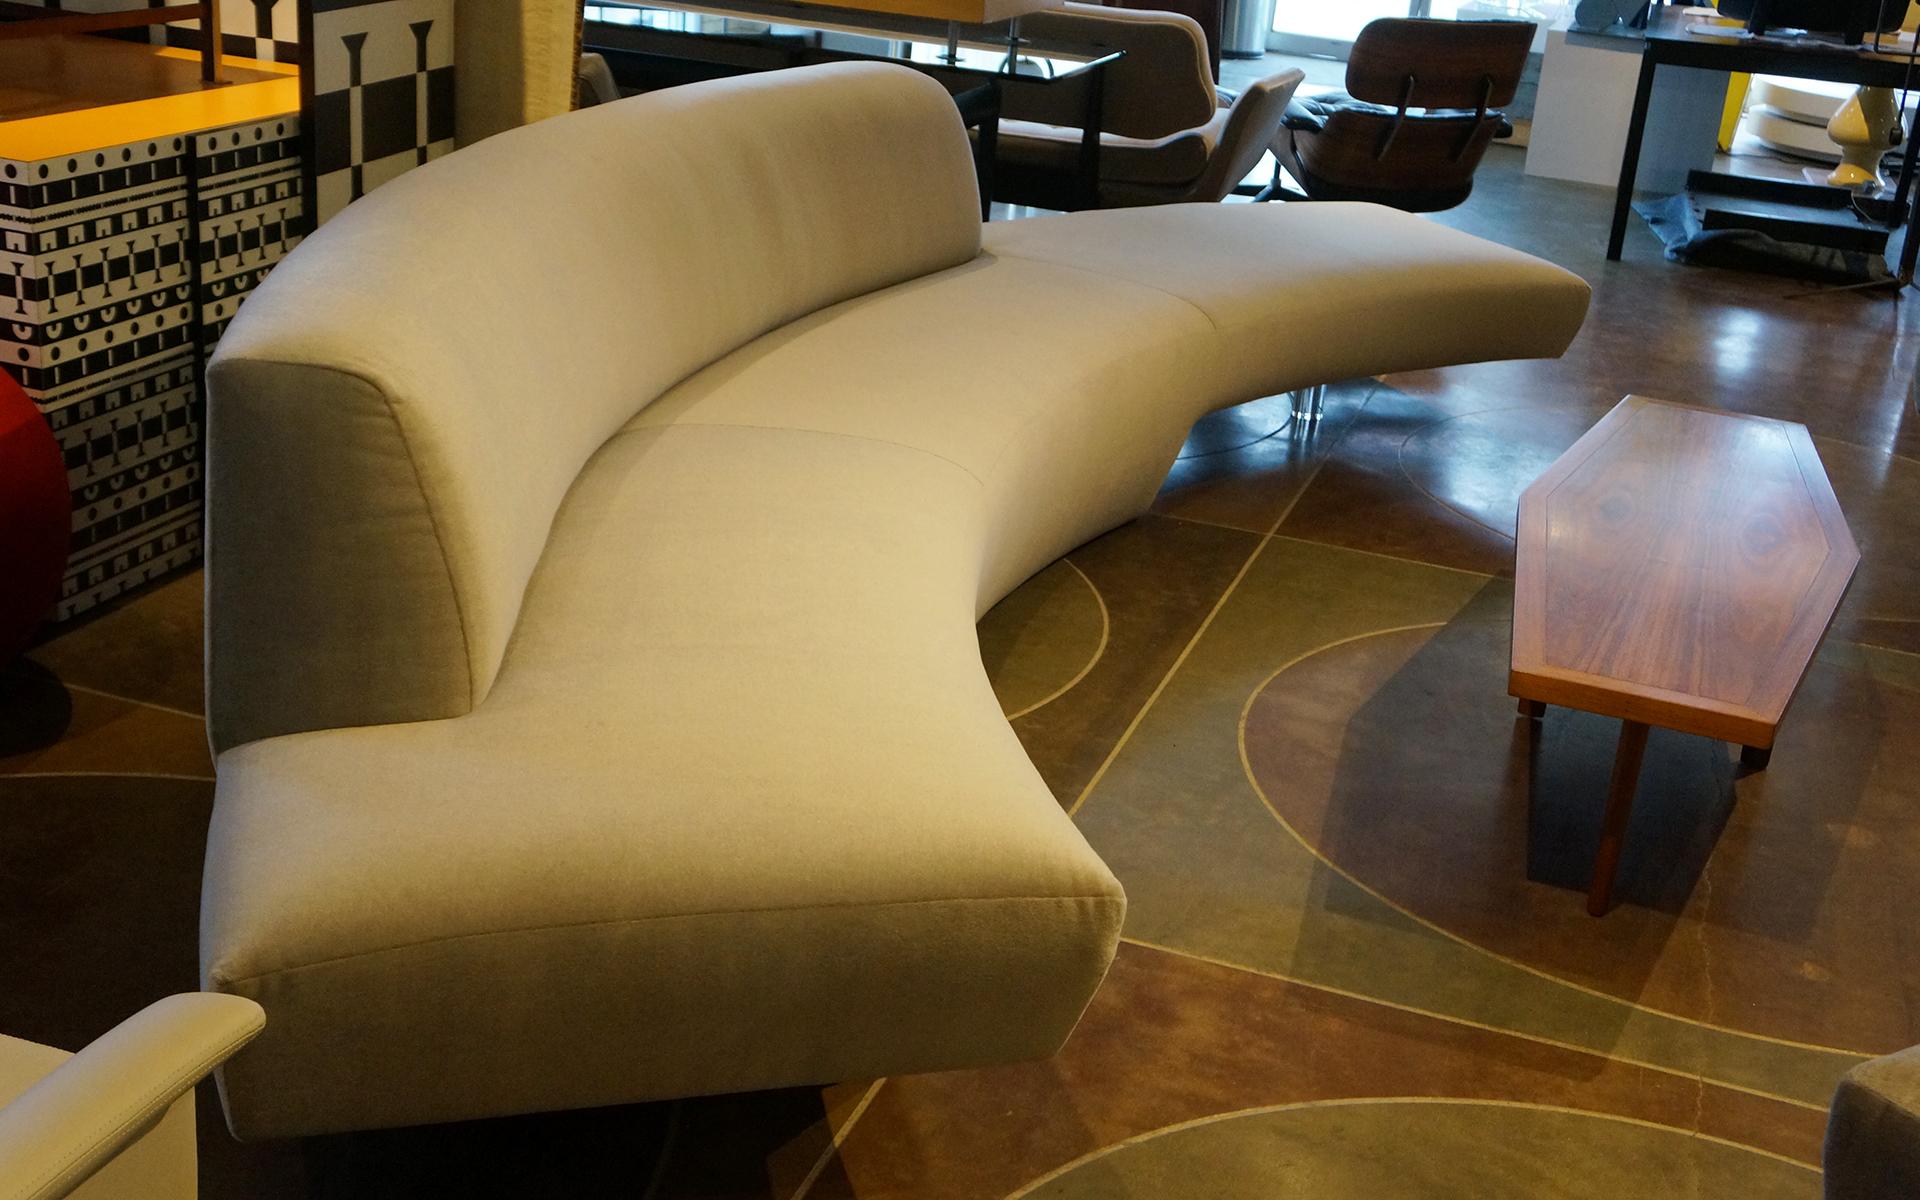 American Pair of Long Curved Sofas from the John Lautner Elrod House, Rare Opportunity